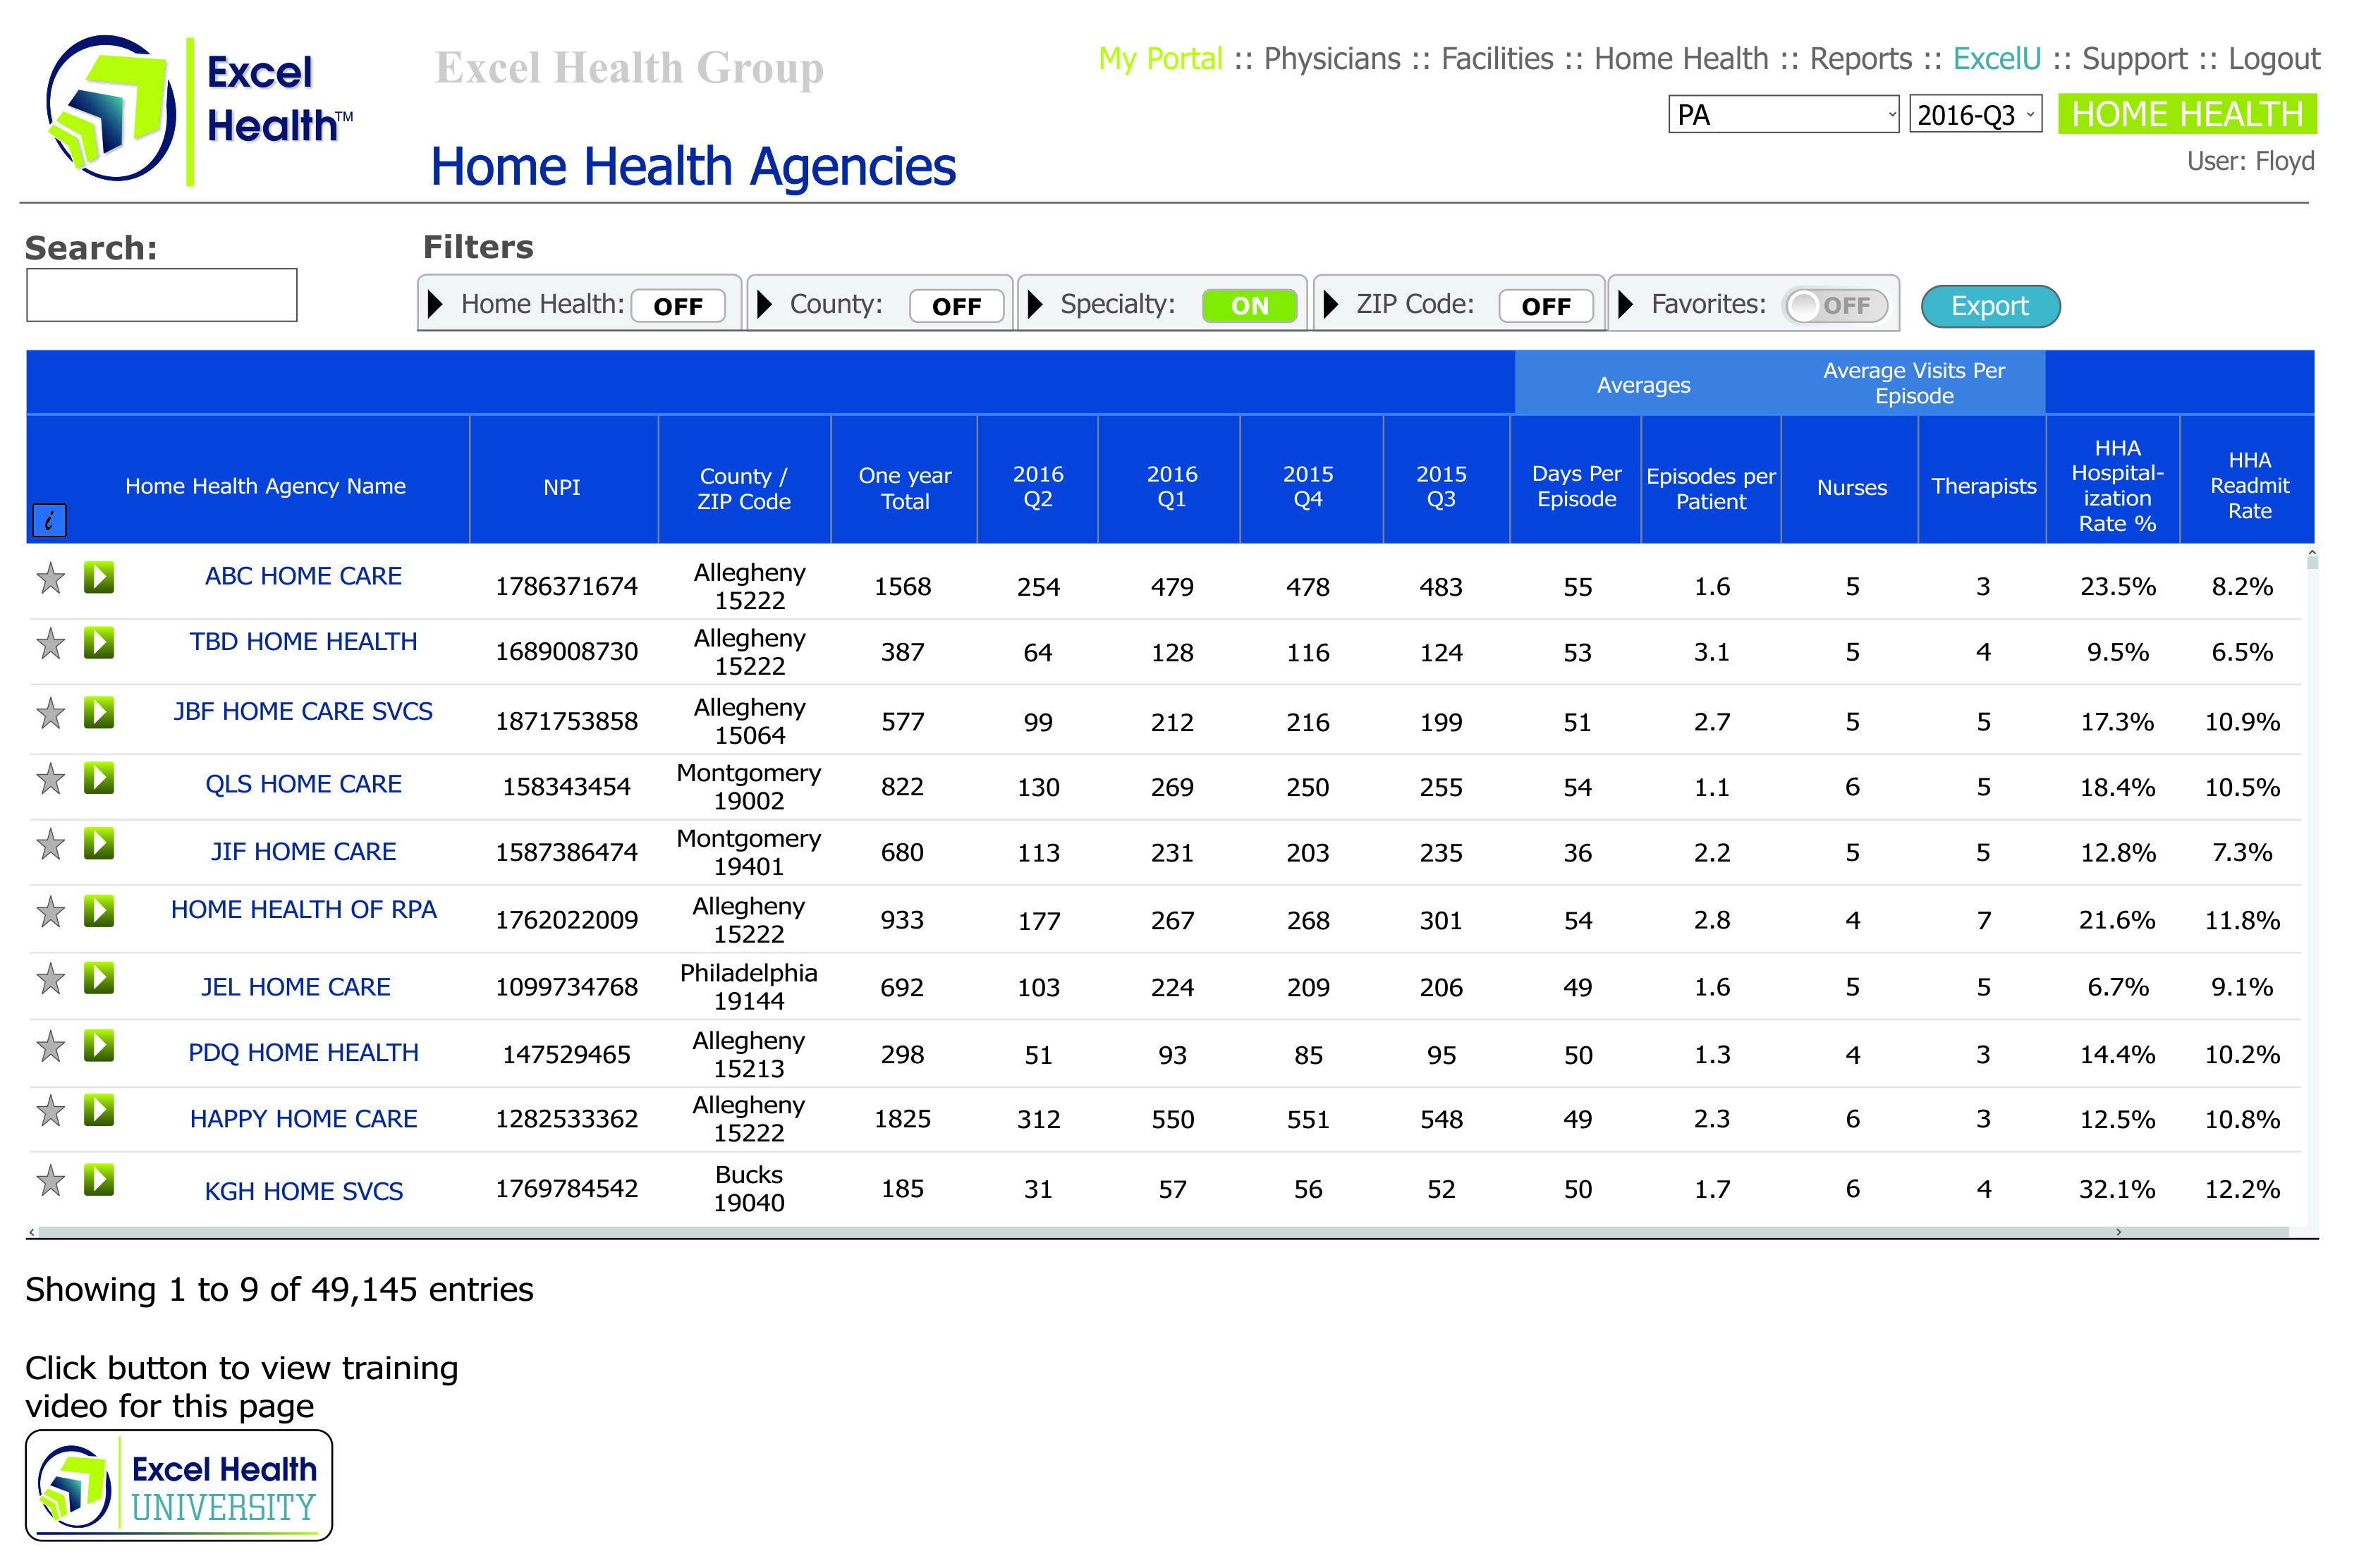 Detailed metrics for every Home Health Agency in the US